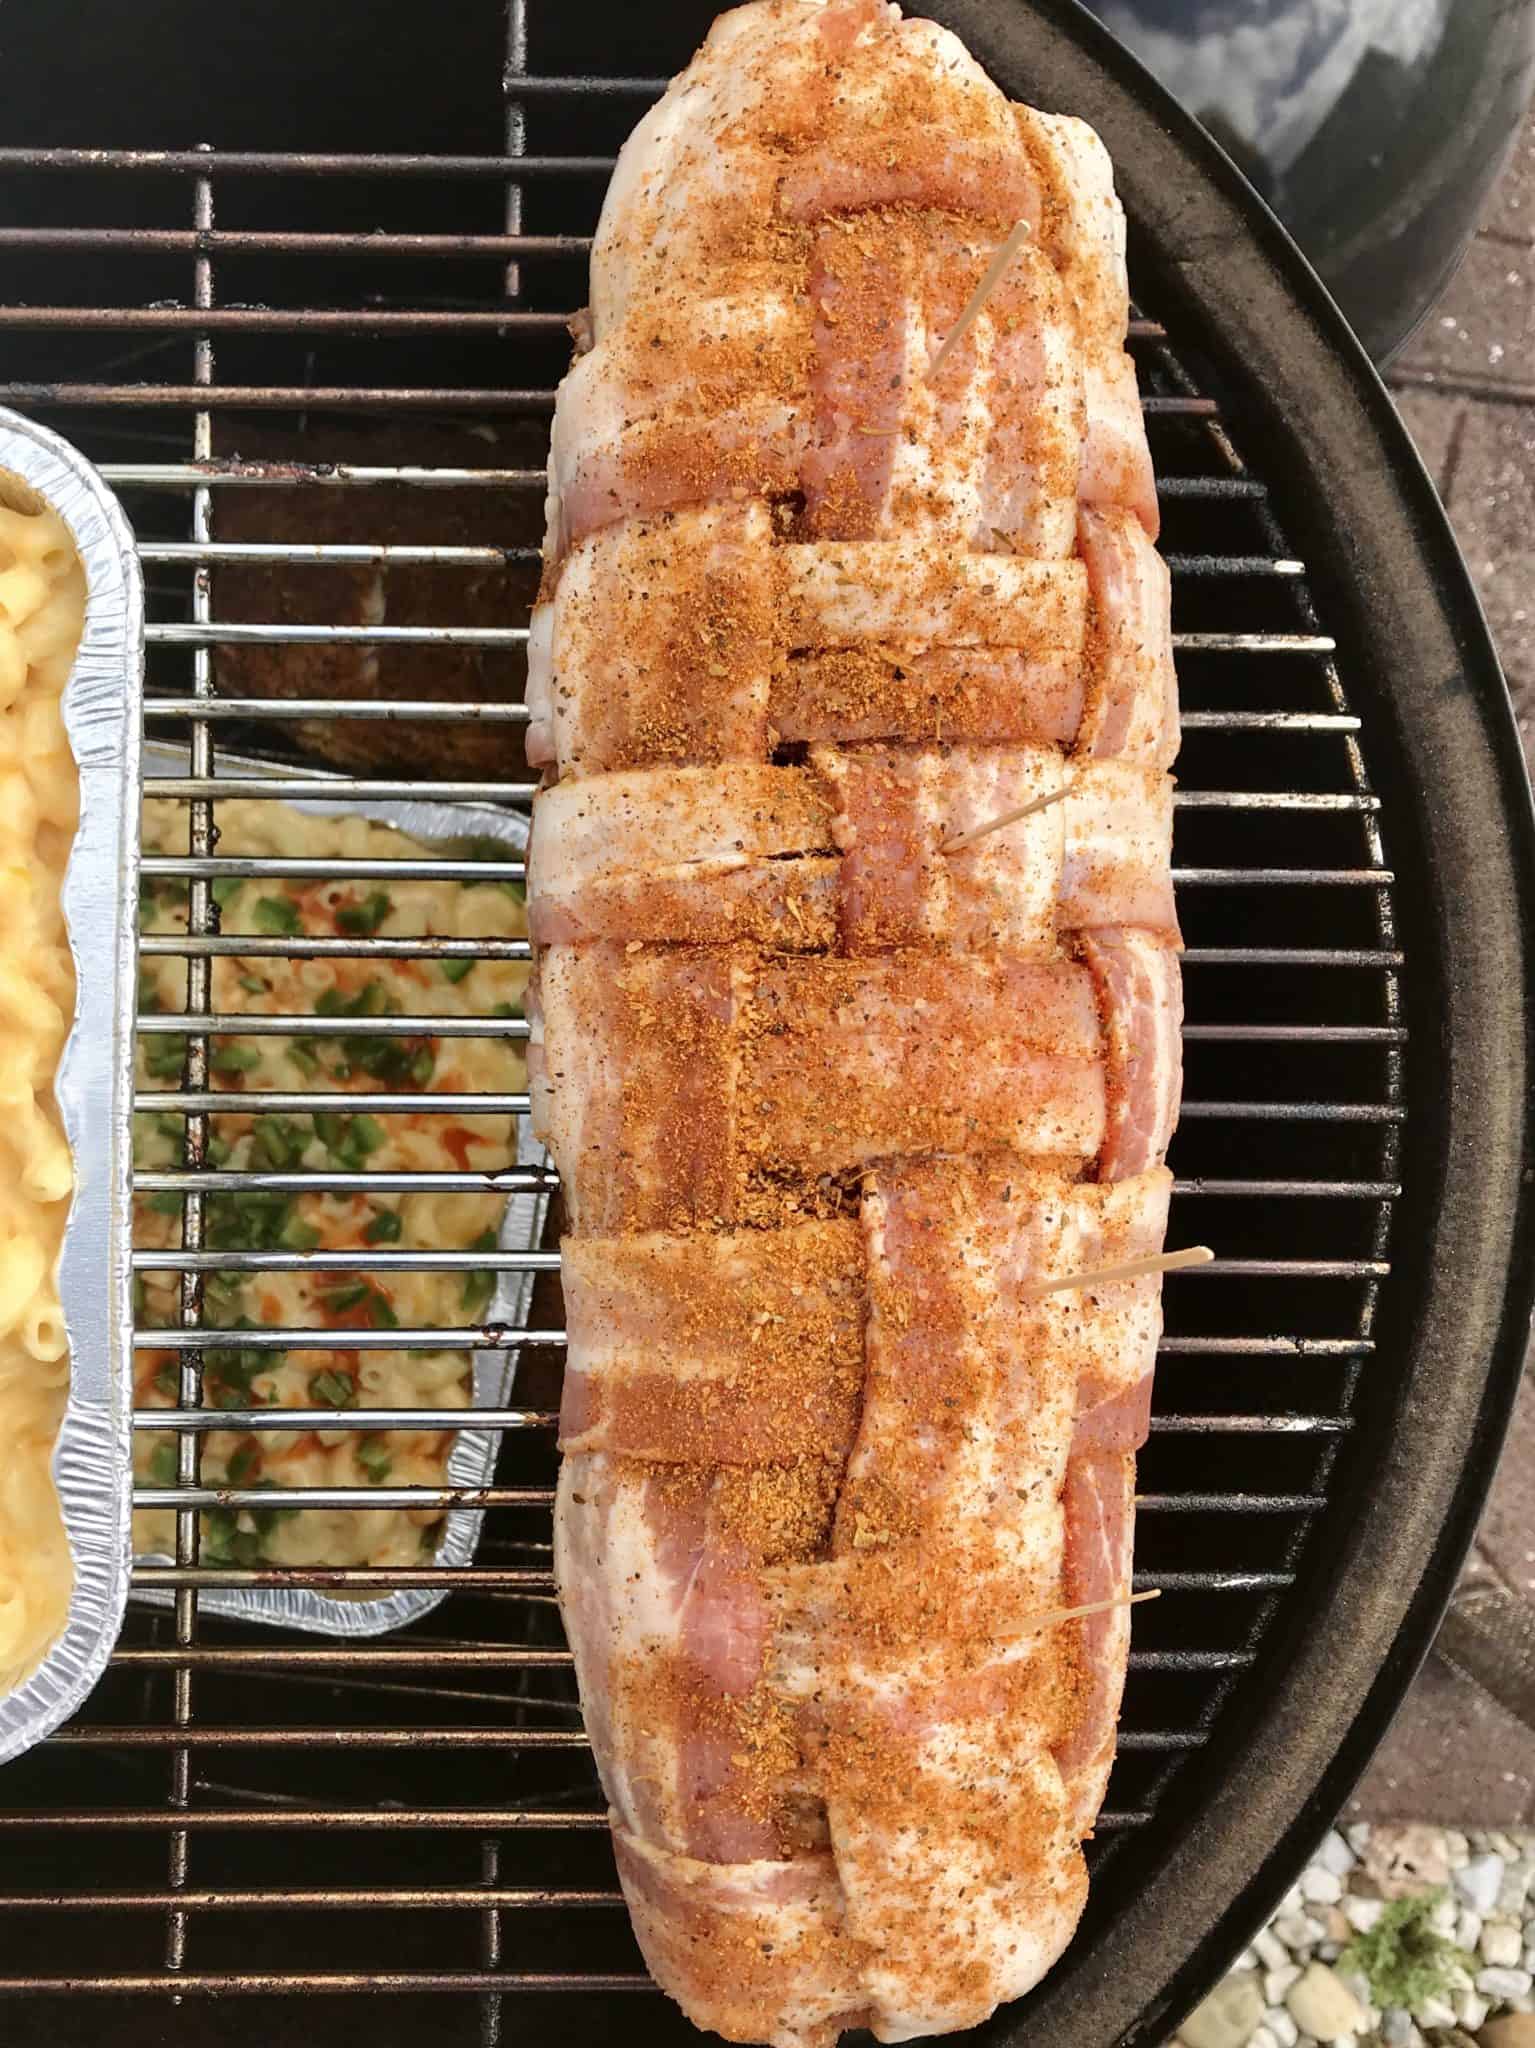 Bacon explosion sitting on weber grill grates with smoked Mac and cheese overhead shot